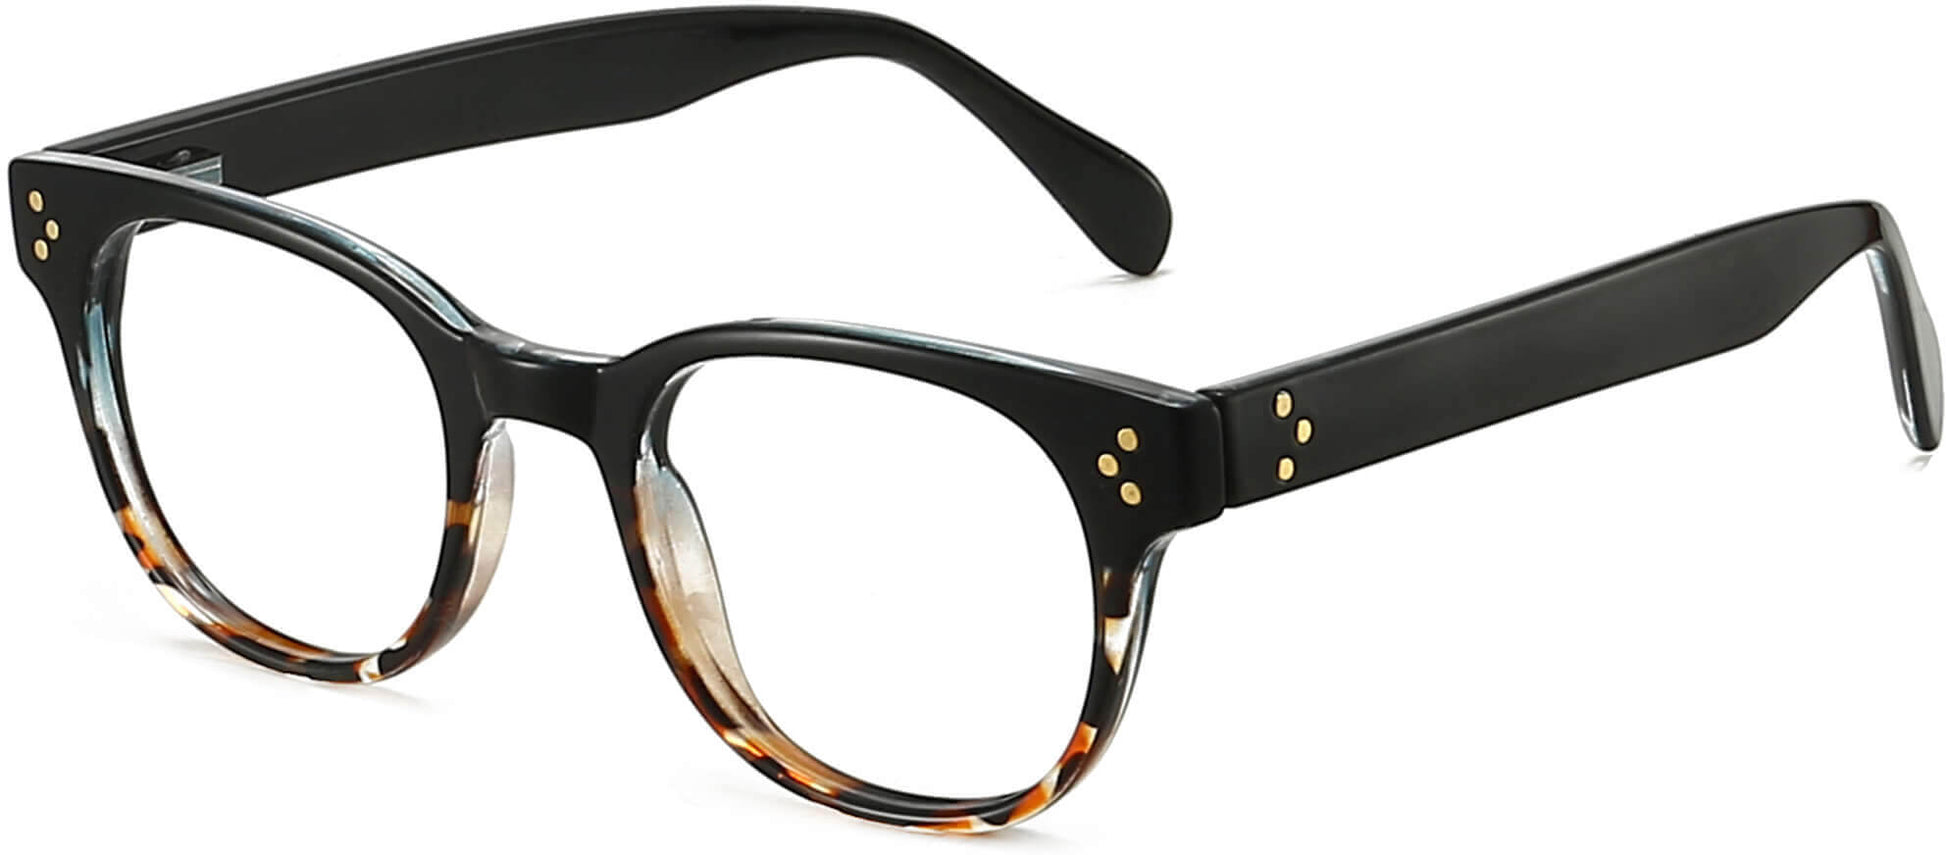 Kelly Round Tortoise Eyeglasses from ANRRI, angle view